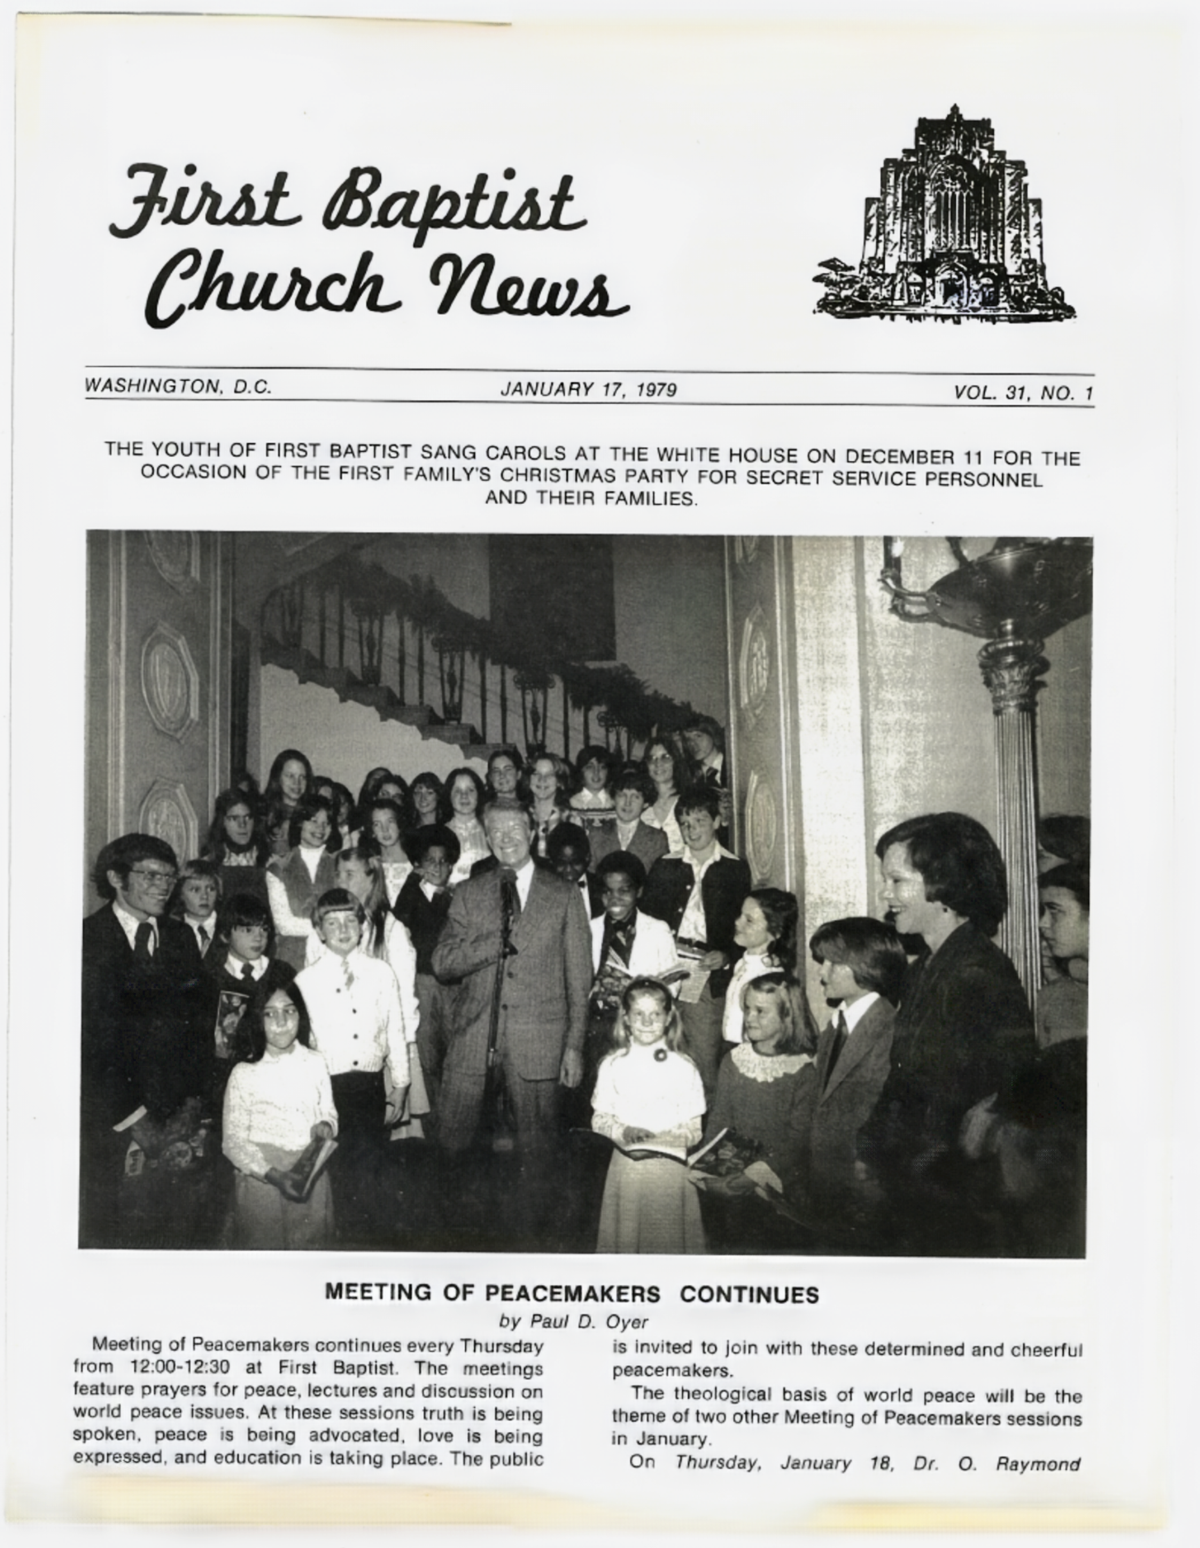 YOUTH-OF-FIRST-BAPTIST-SANG-CAROLS-AT-THE-WHITE-HOUSEFOR-SECRET-SERVICE-PERSONNEL-AND-THEIR-FAMILIES.png